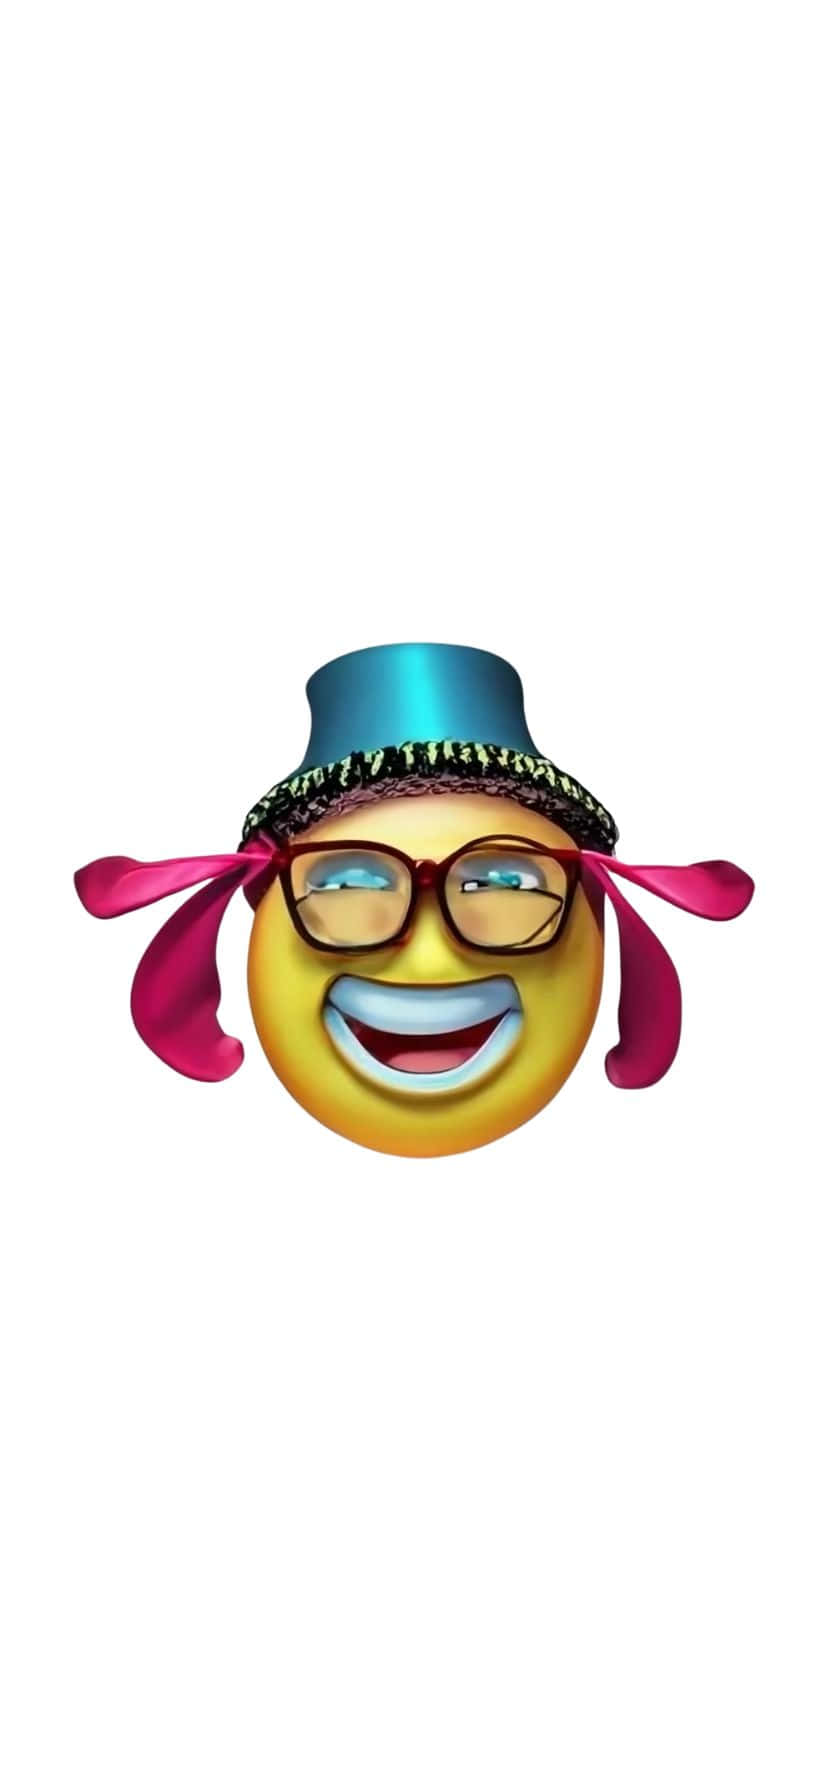 Laughing_ Emoji_with_ Hat_and_ Glasses Wallpaper